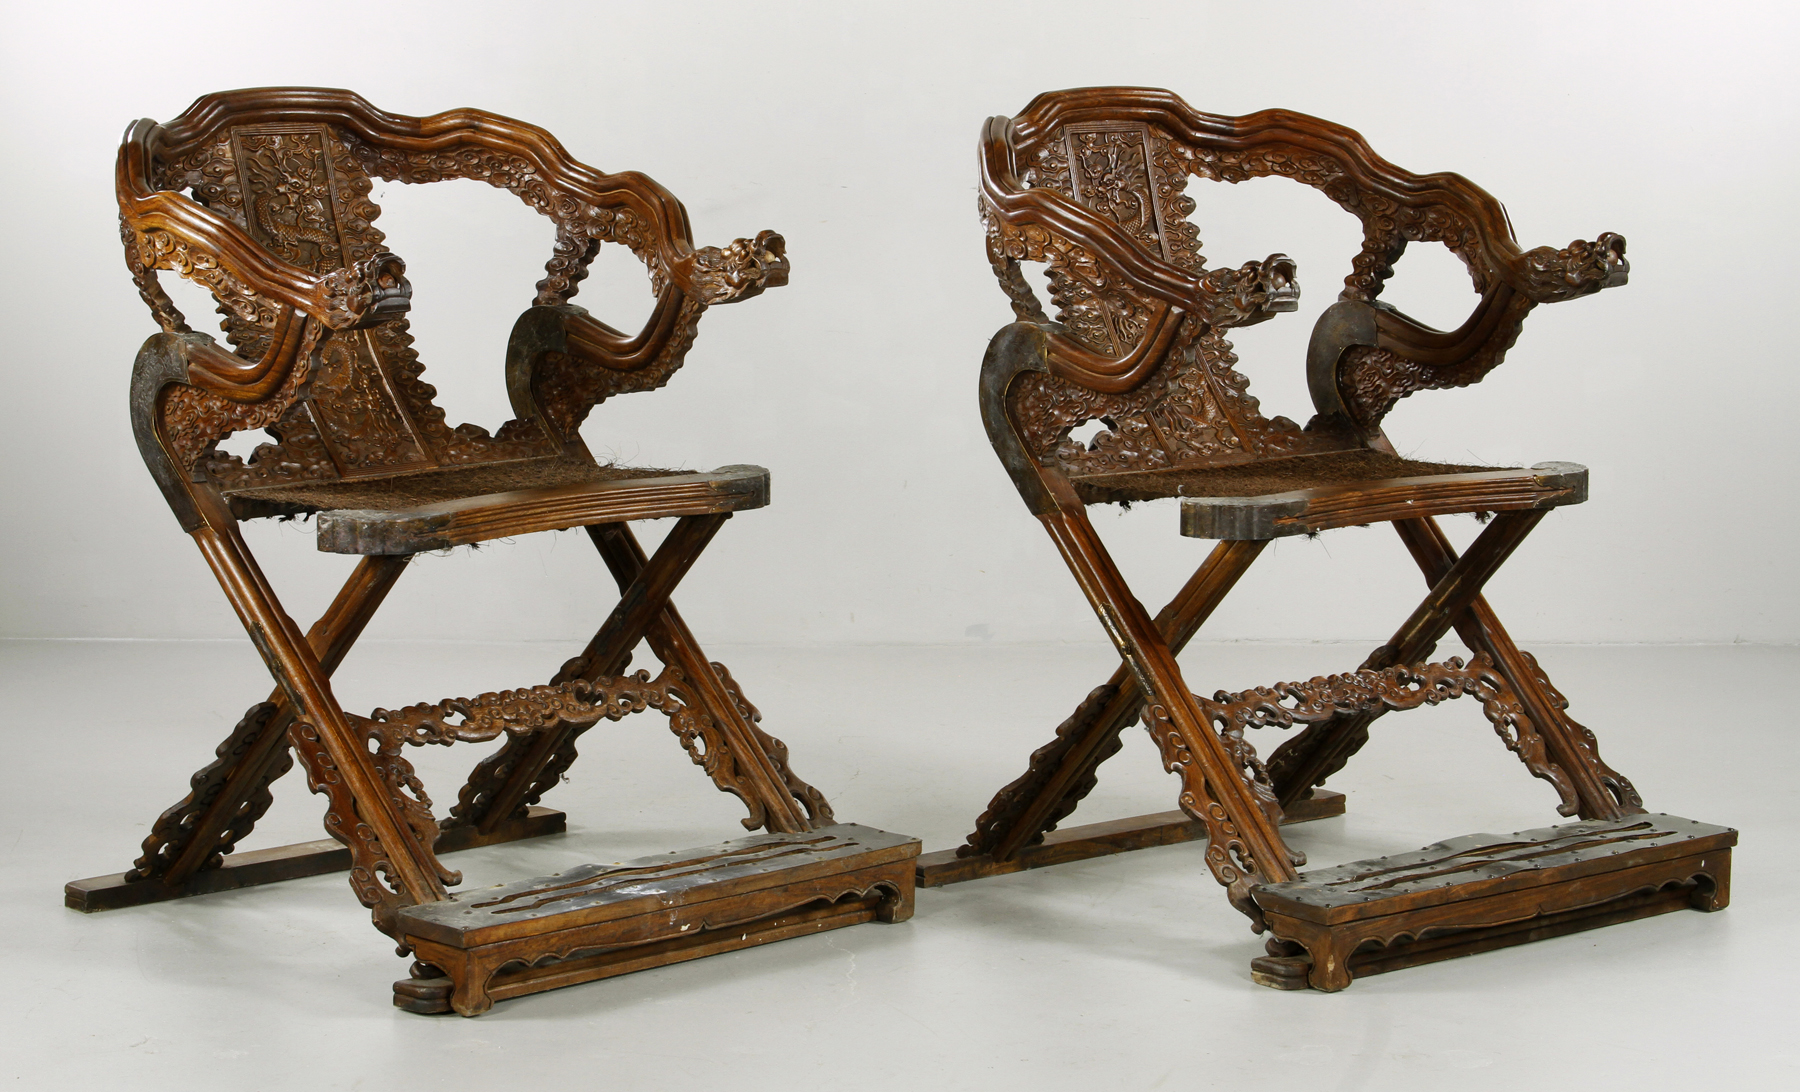 Pair of Chinese Huanghuali office chairs